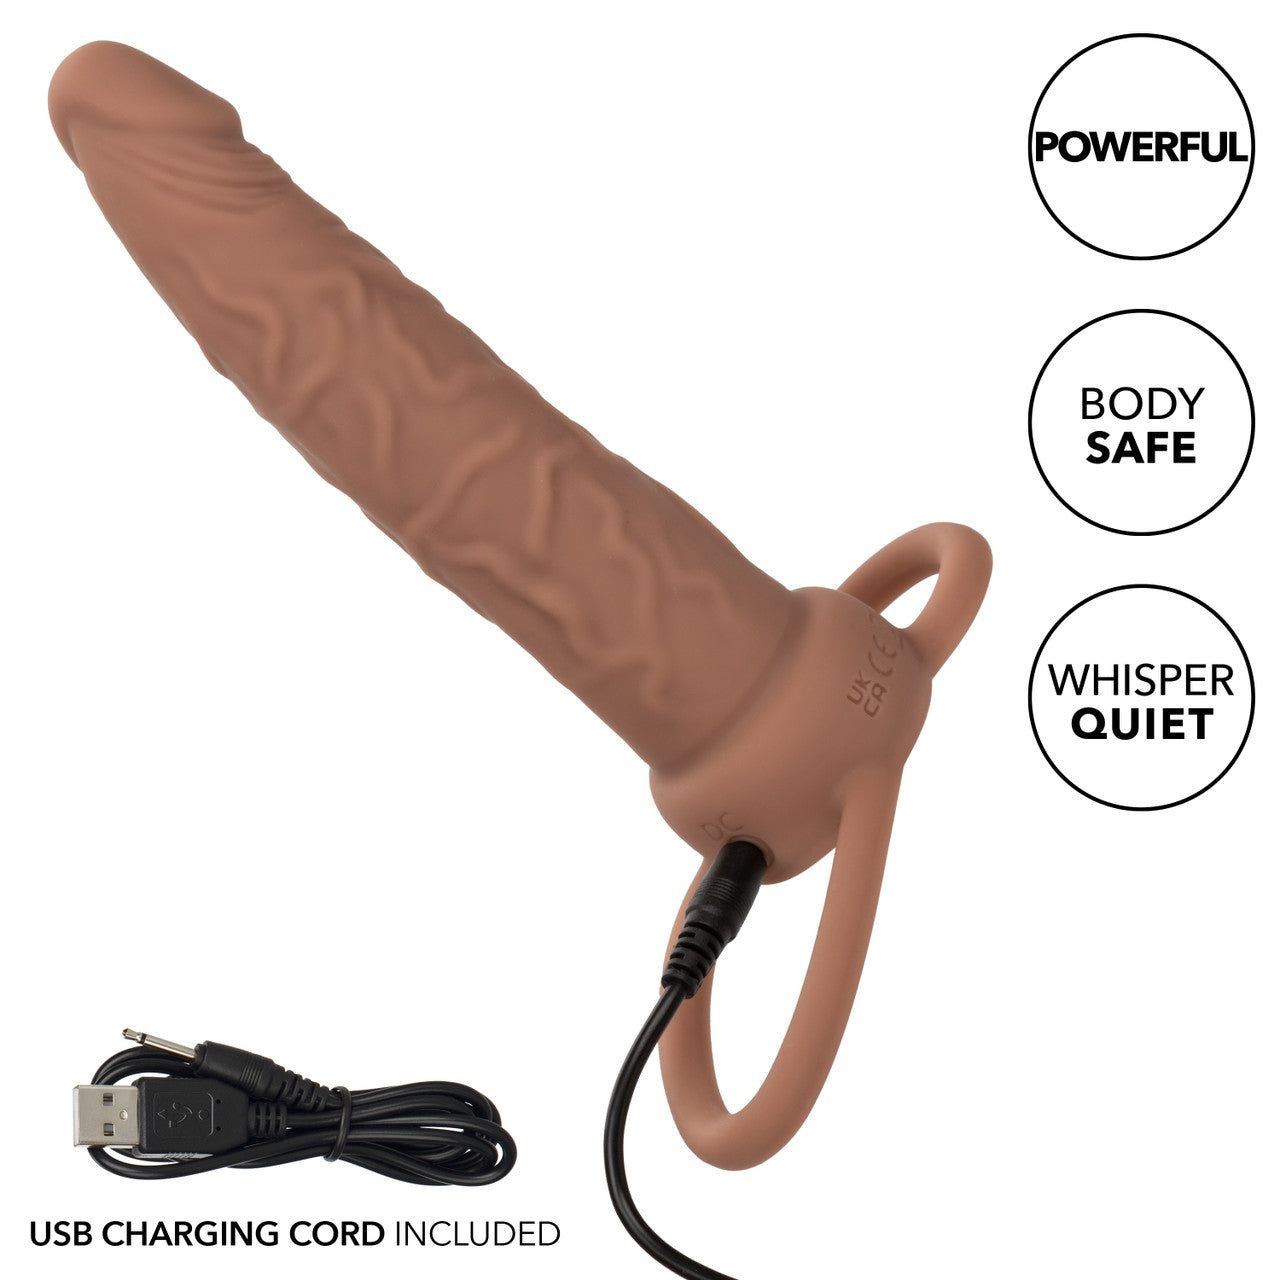 Rechargeable Dual Penetrator - Brown - Thorn & Feather